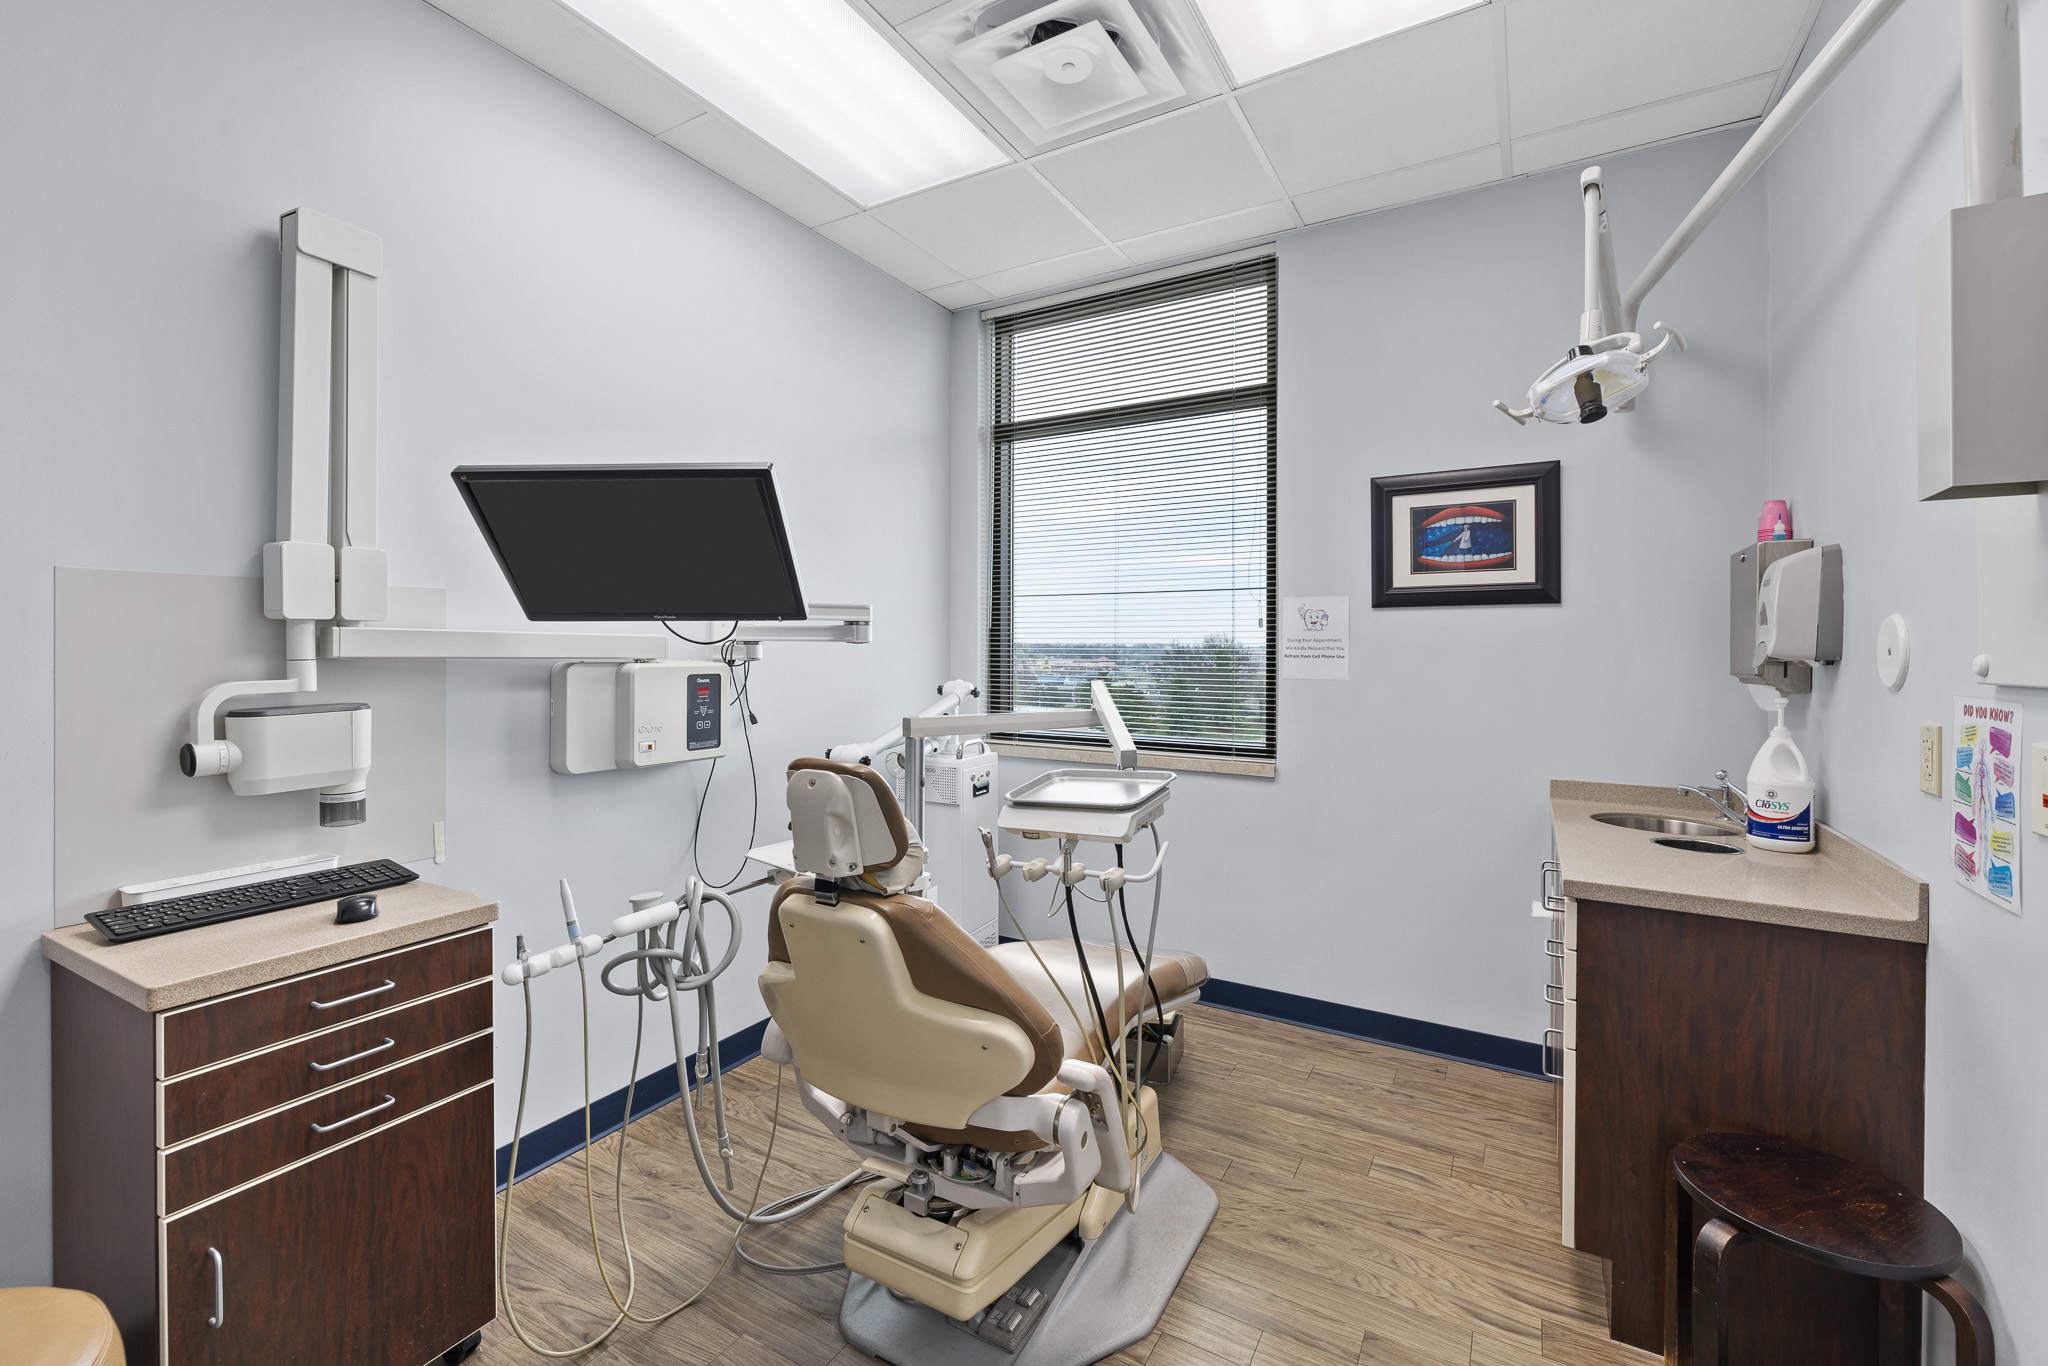 Distinct patient exam room in Dr. Kevin Burgdorf’s dental clinic, illustrating the variety and quality of patient care environments.